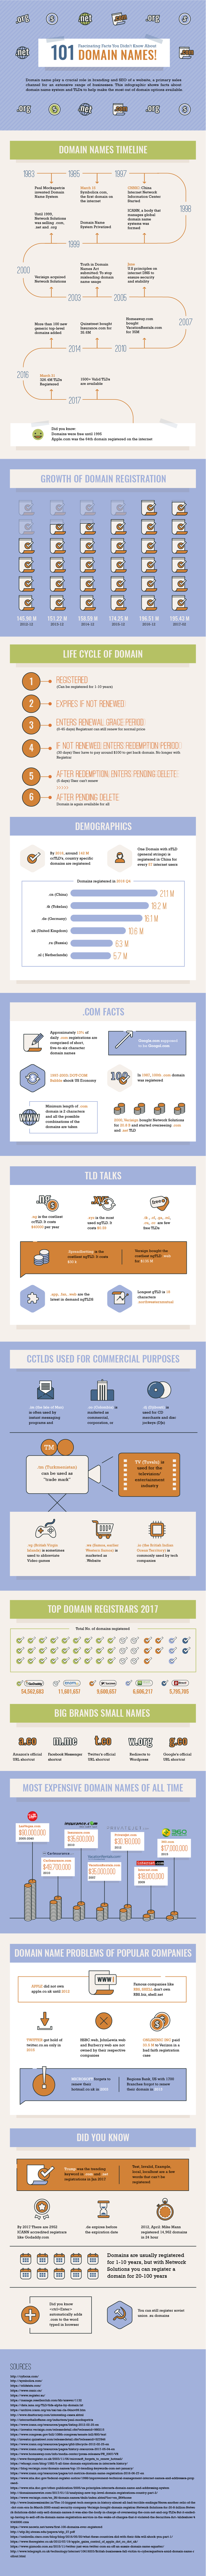 domain name facts and figure you must know infographic